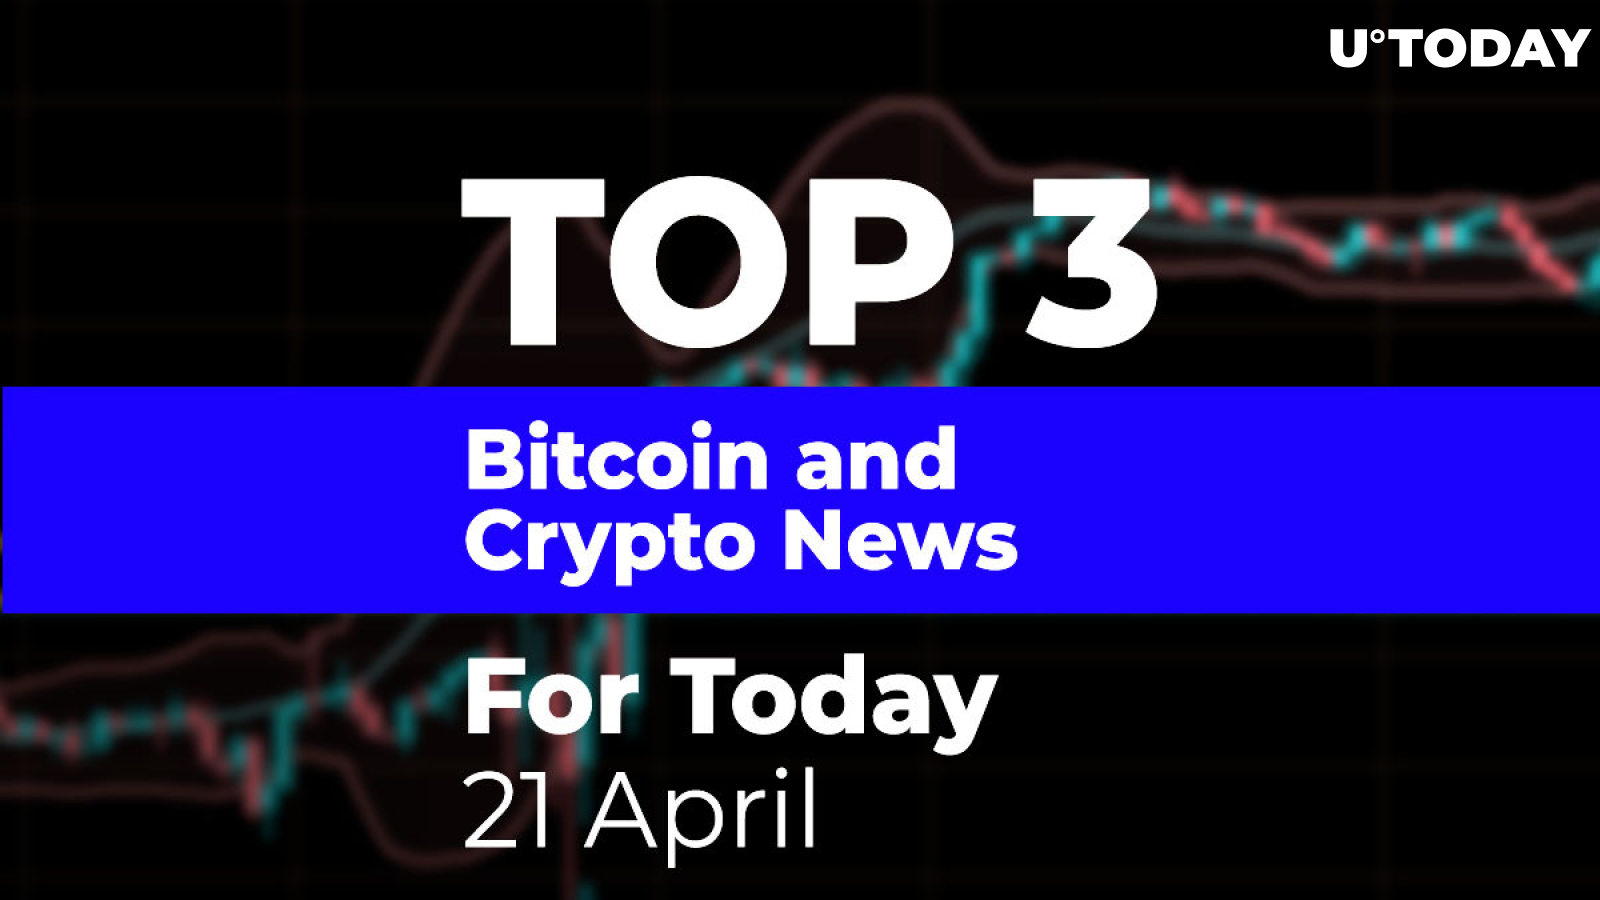 TOP 3 Bitcoin and Crypto News for Today: 21 April